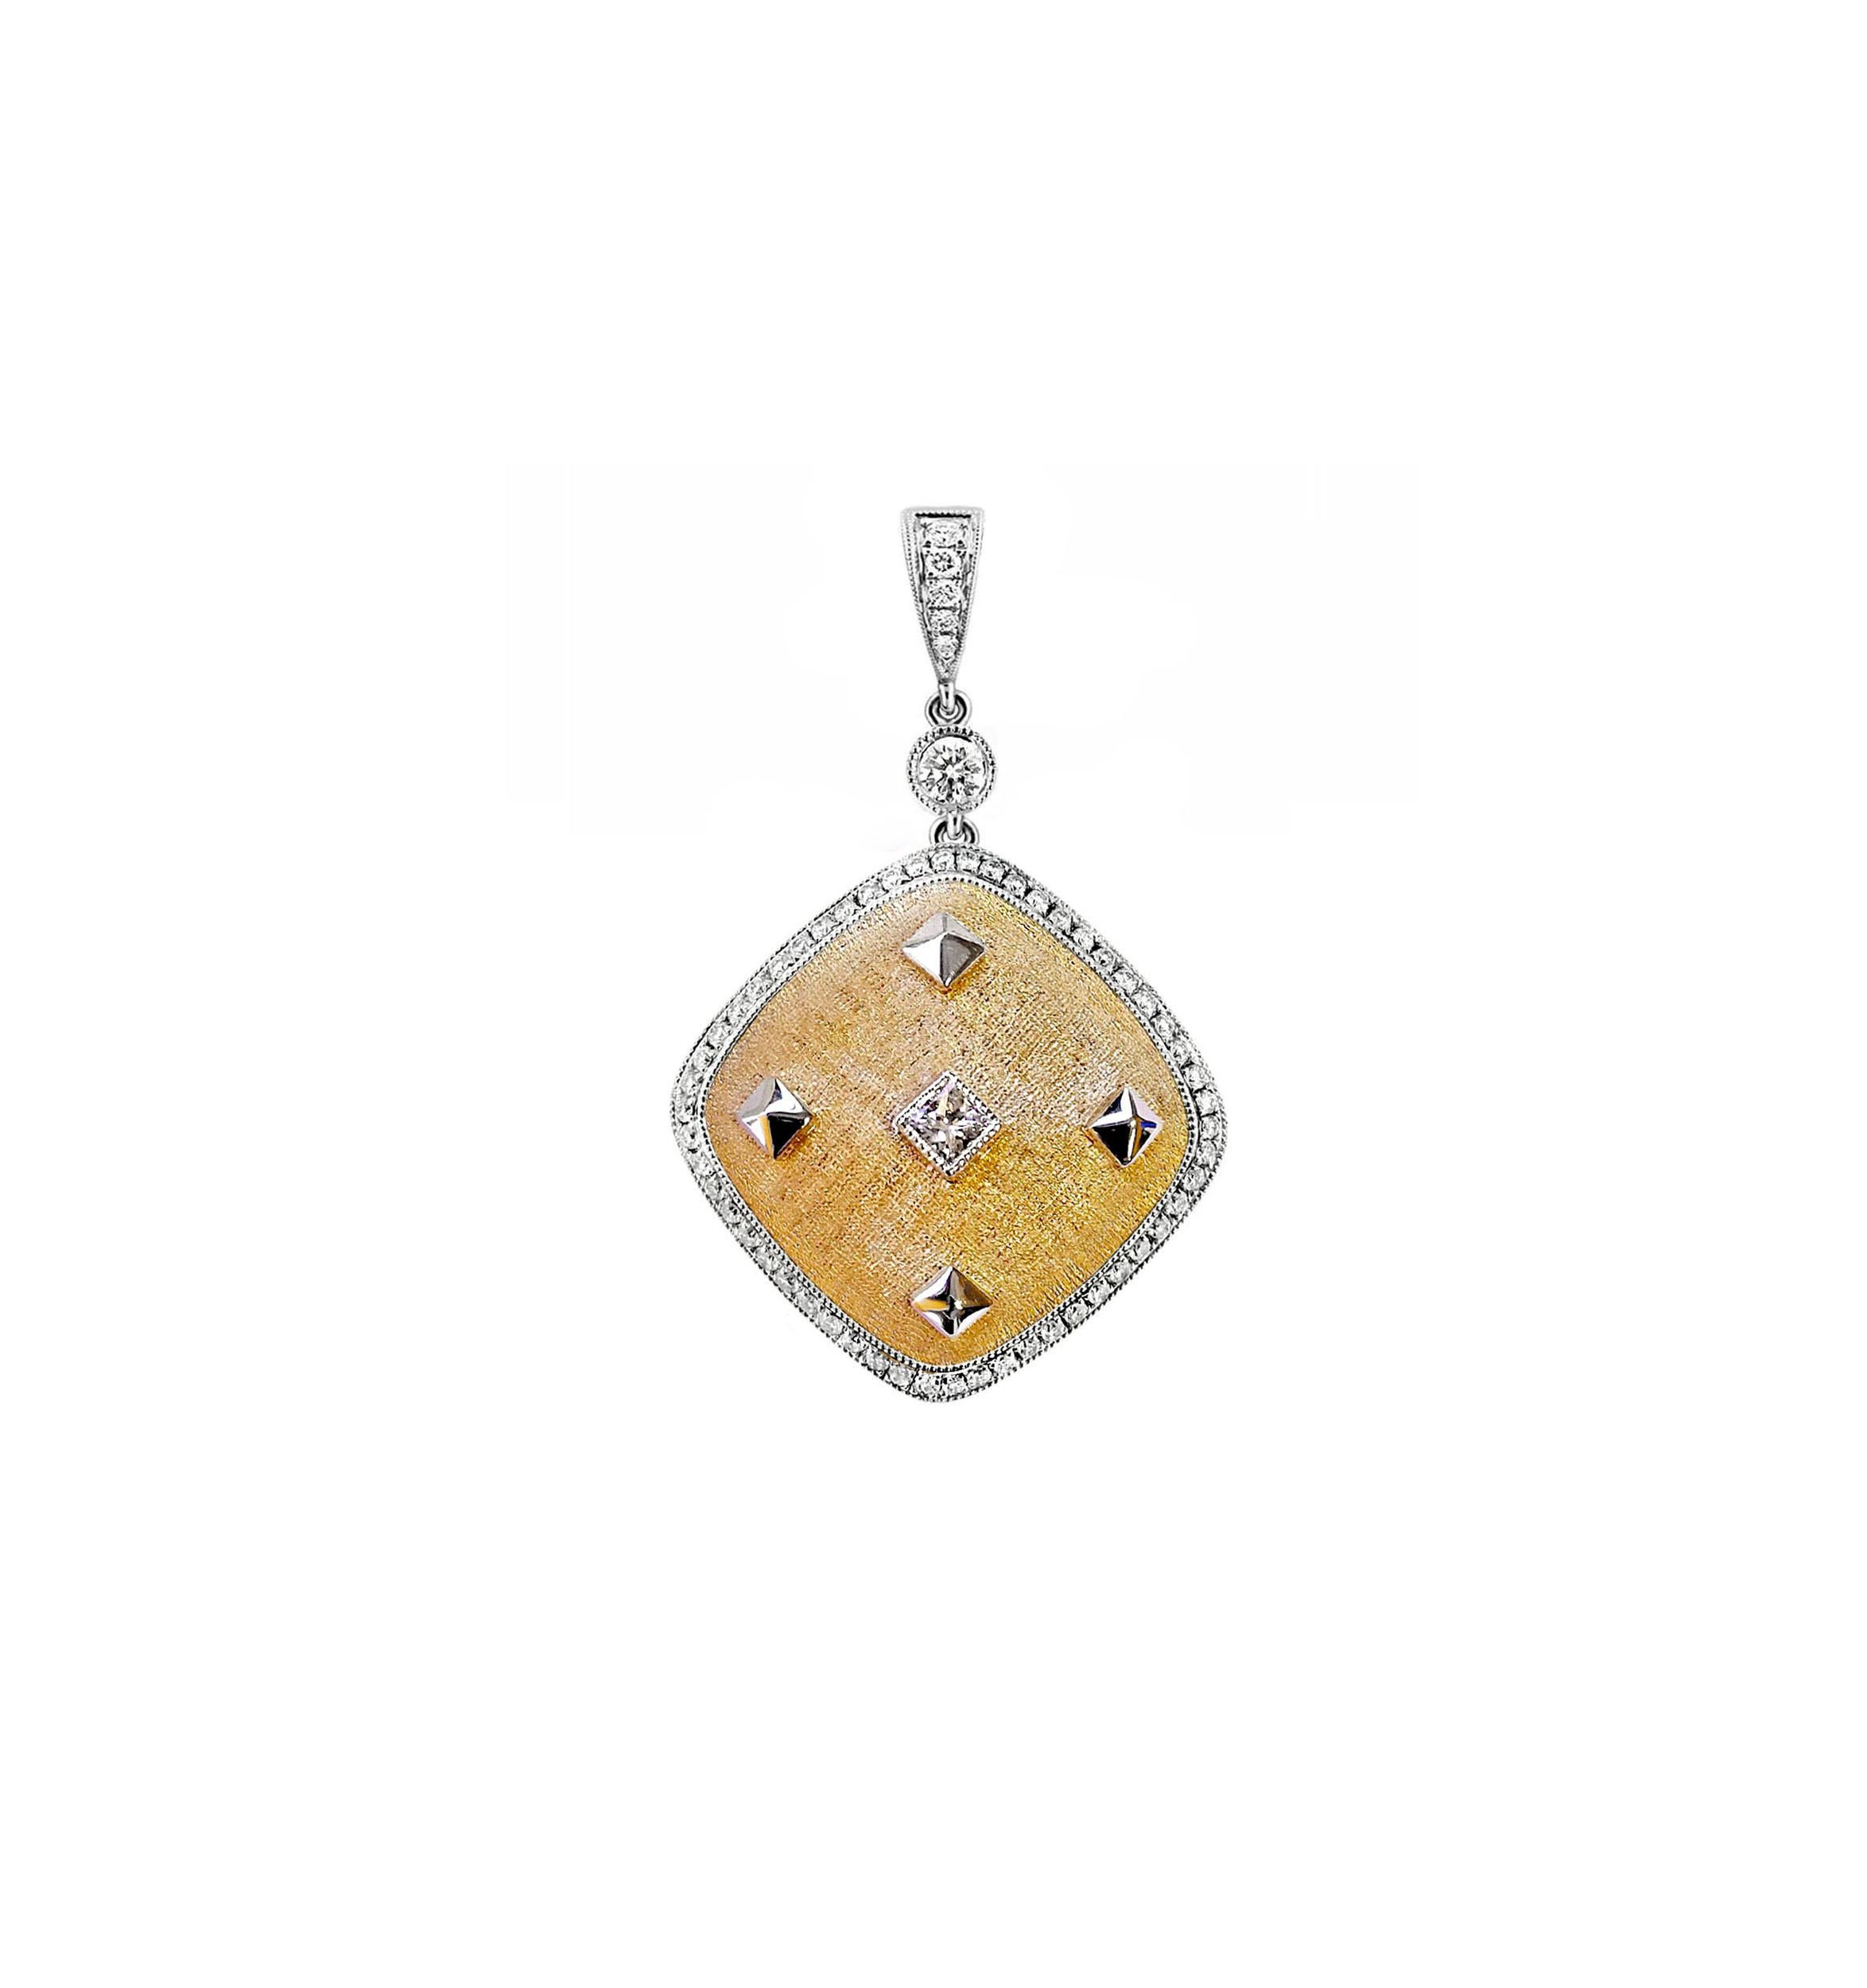 Produced by award winning Italian designer Stefano Vitolo. Stefano creates custom artisanal one of a kind jewelry with excellent gemstones in a truly old world Italian craftmanship.

This handcrafted pendant has 0.59 total carat weight of F/G color,